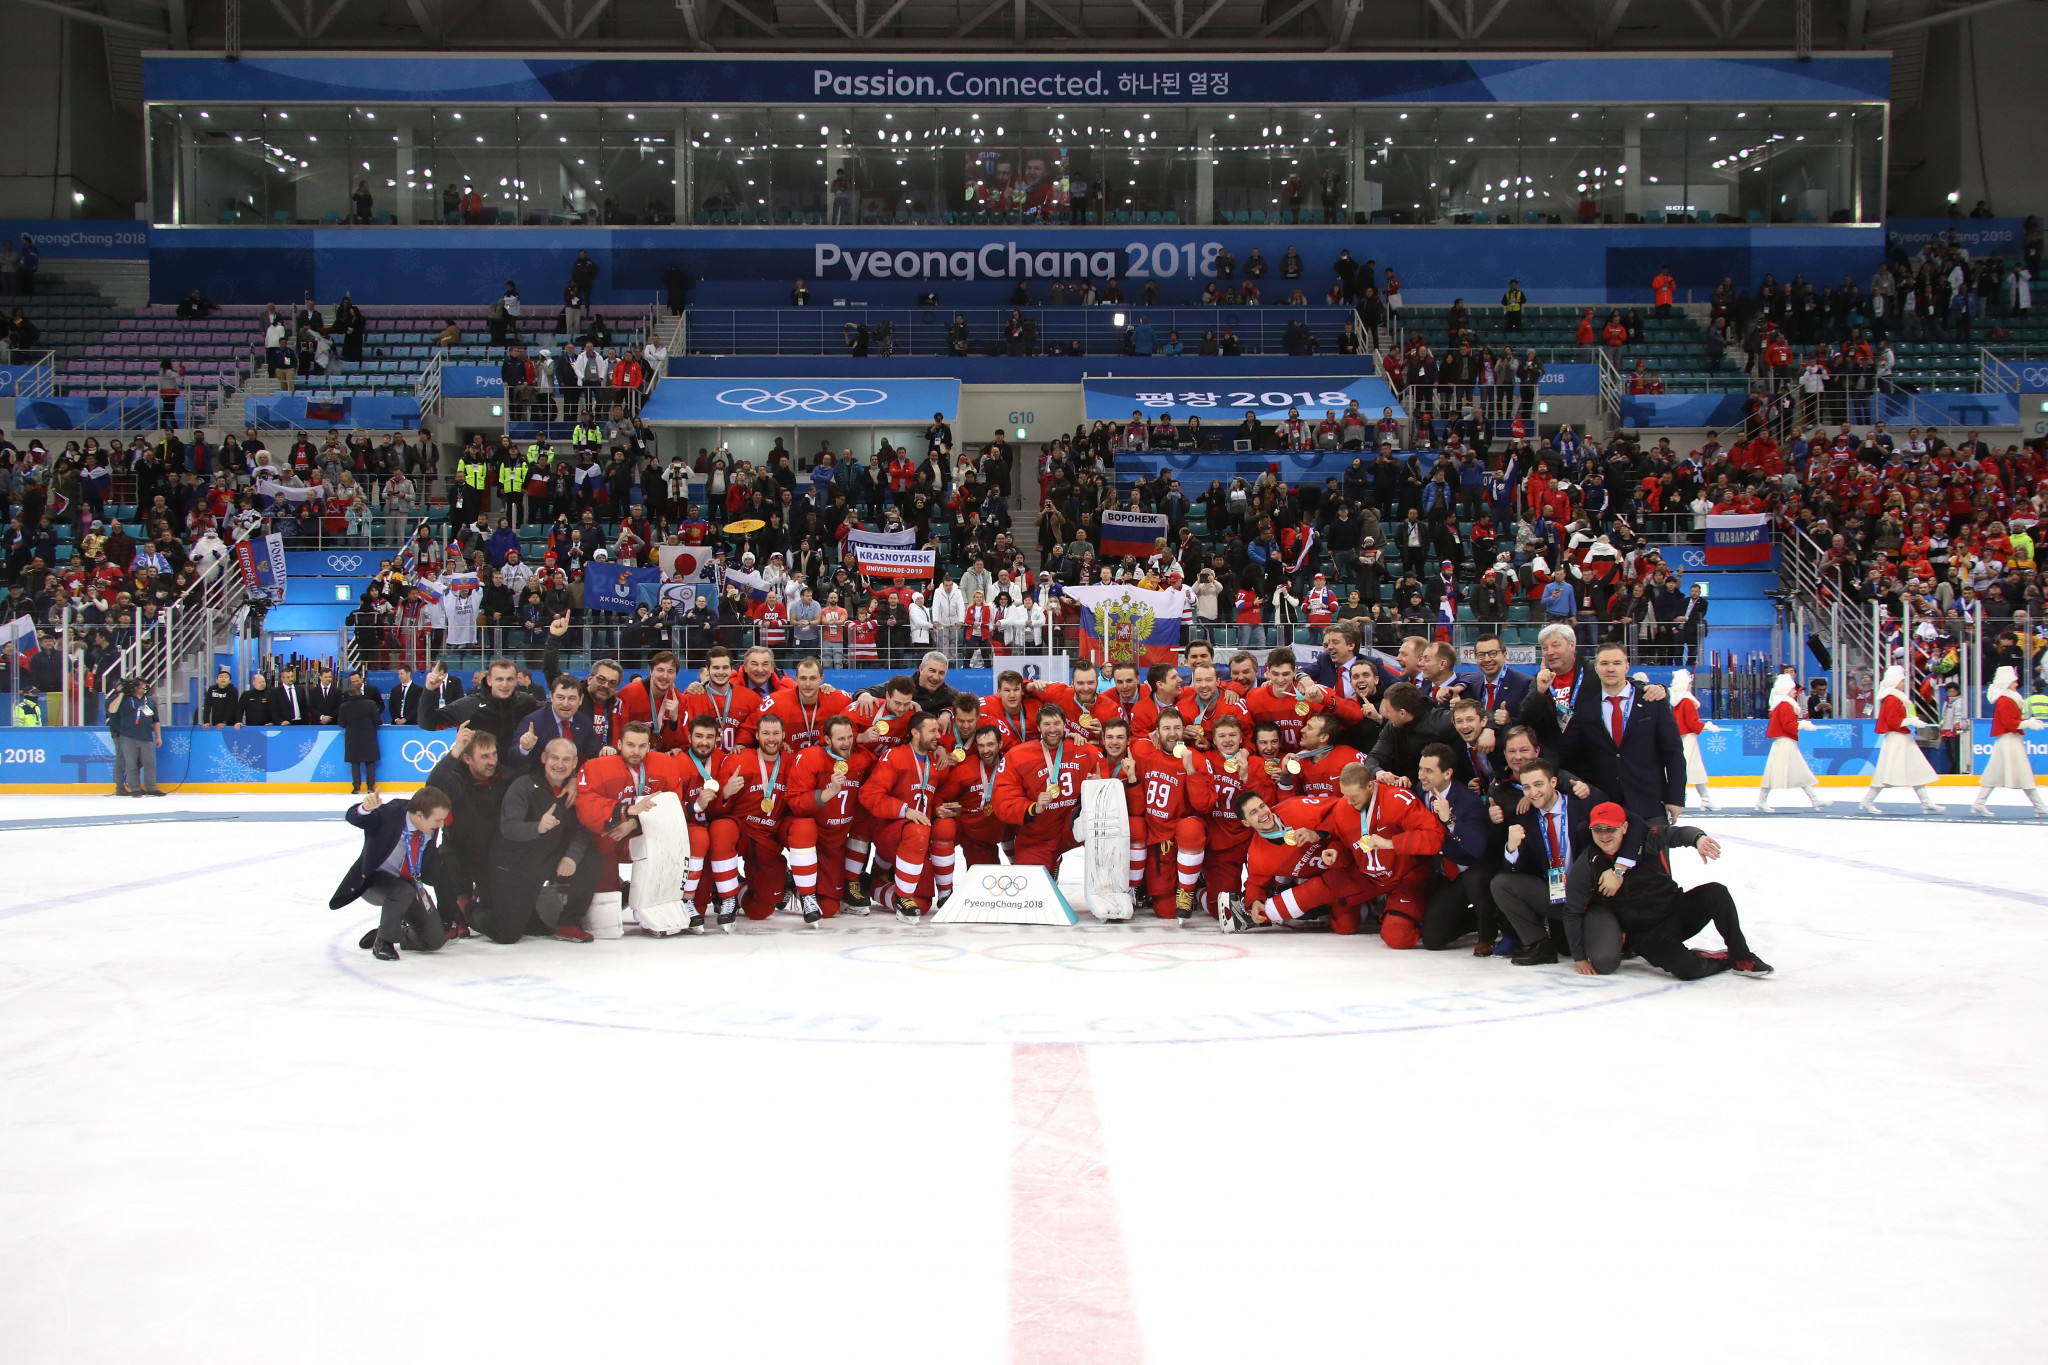 The Russian Olympic Committee will open the men's ice hockey competition at Beijing 2022 as defending champions ©Getty Images